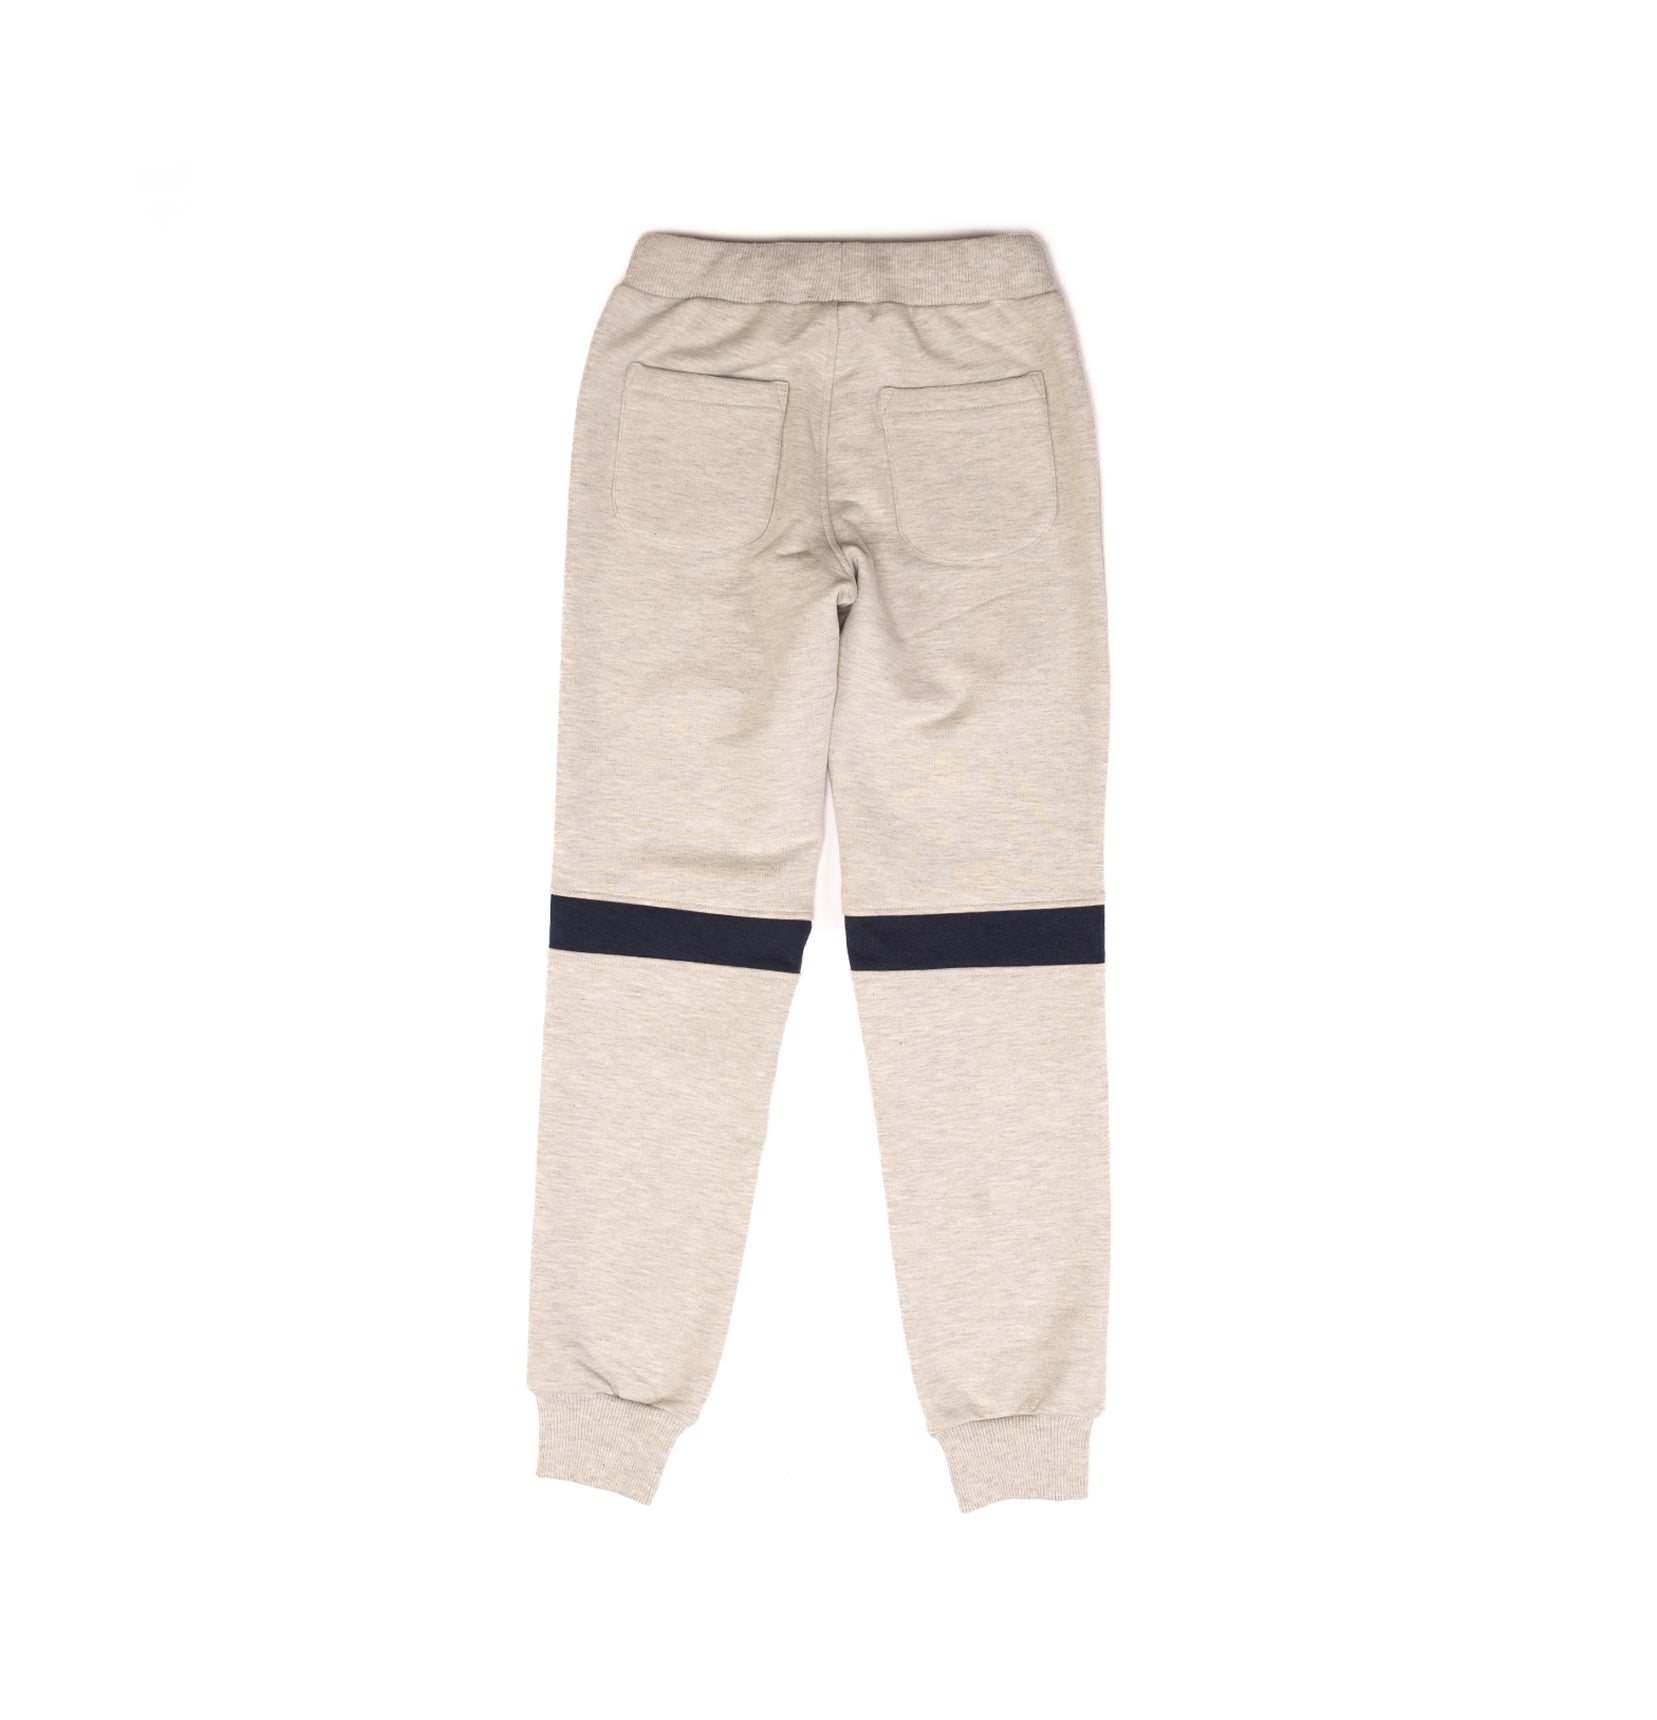 Comfy sweat pants with black strip for boys by Pompelo